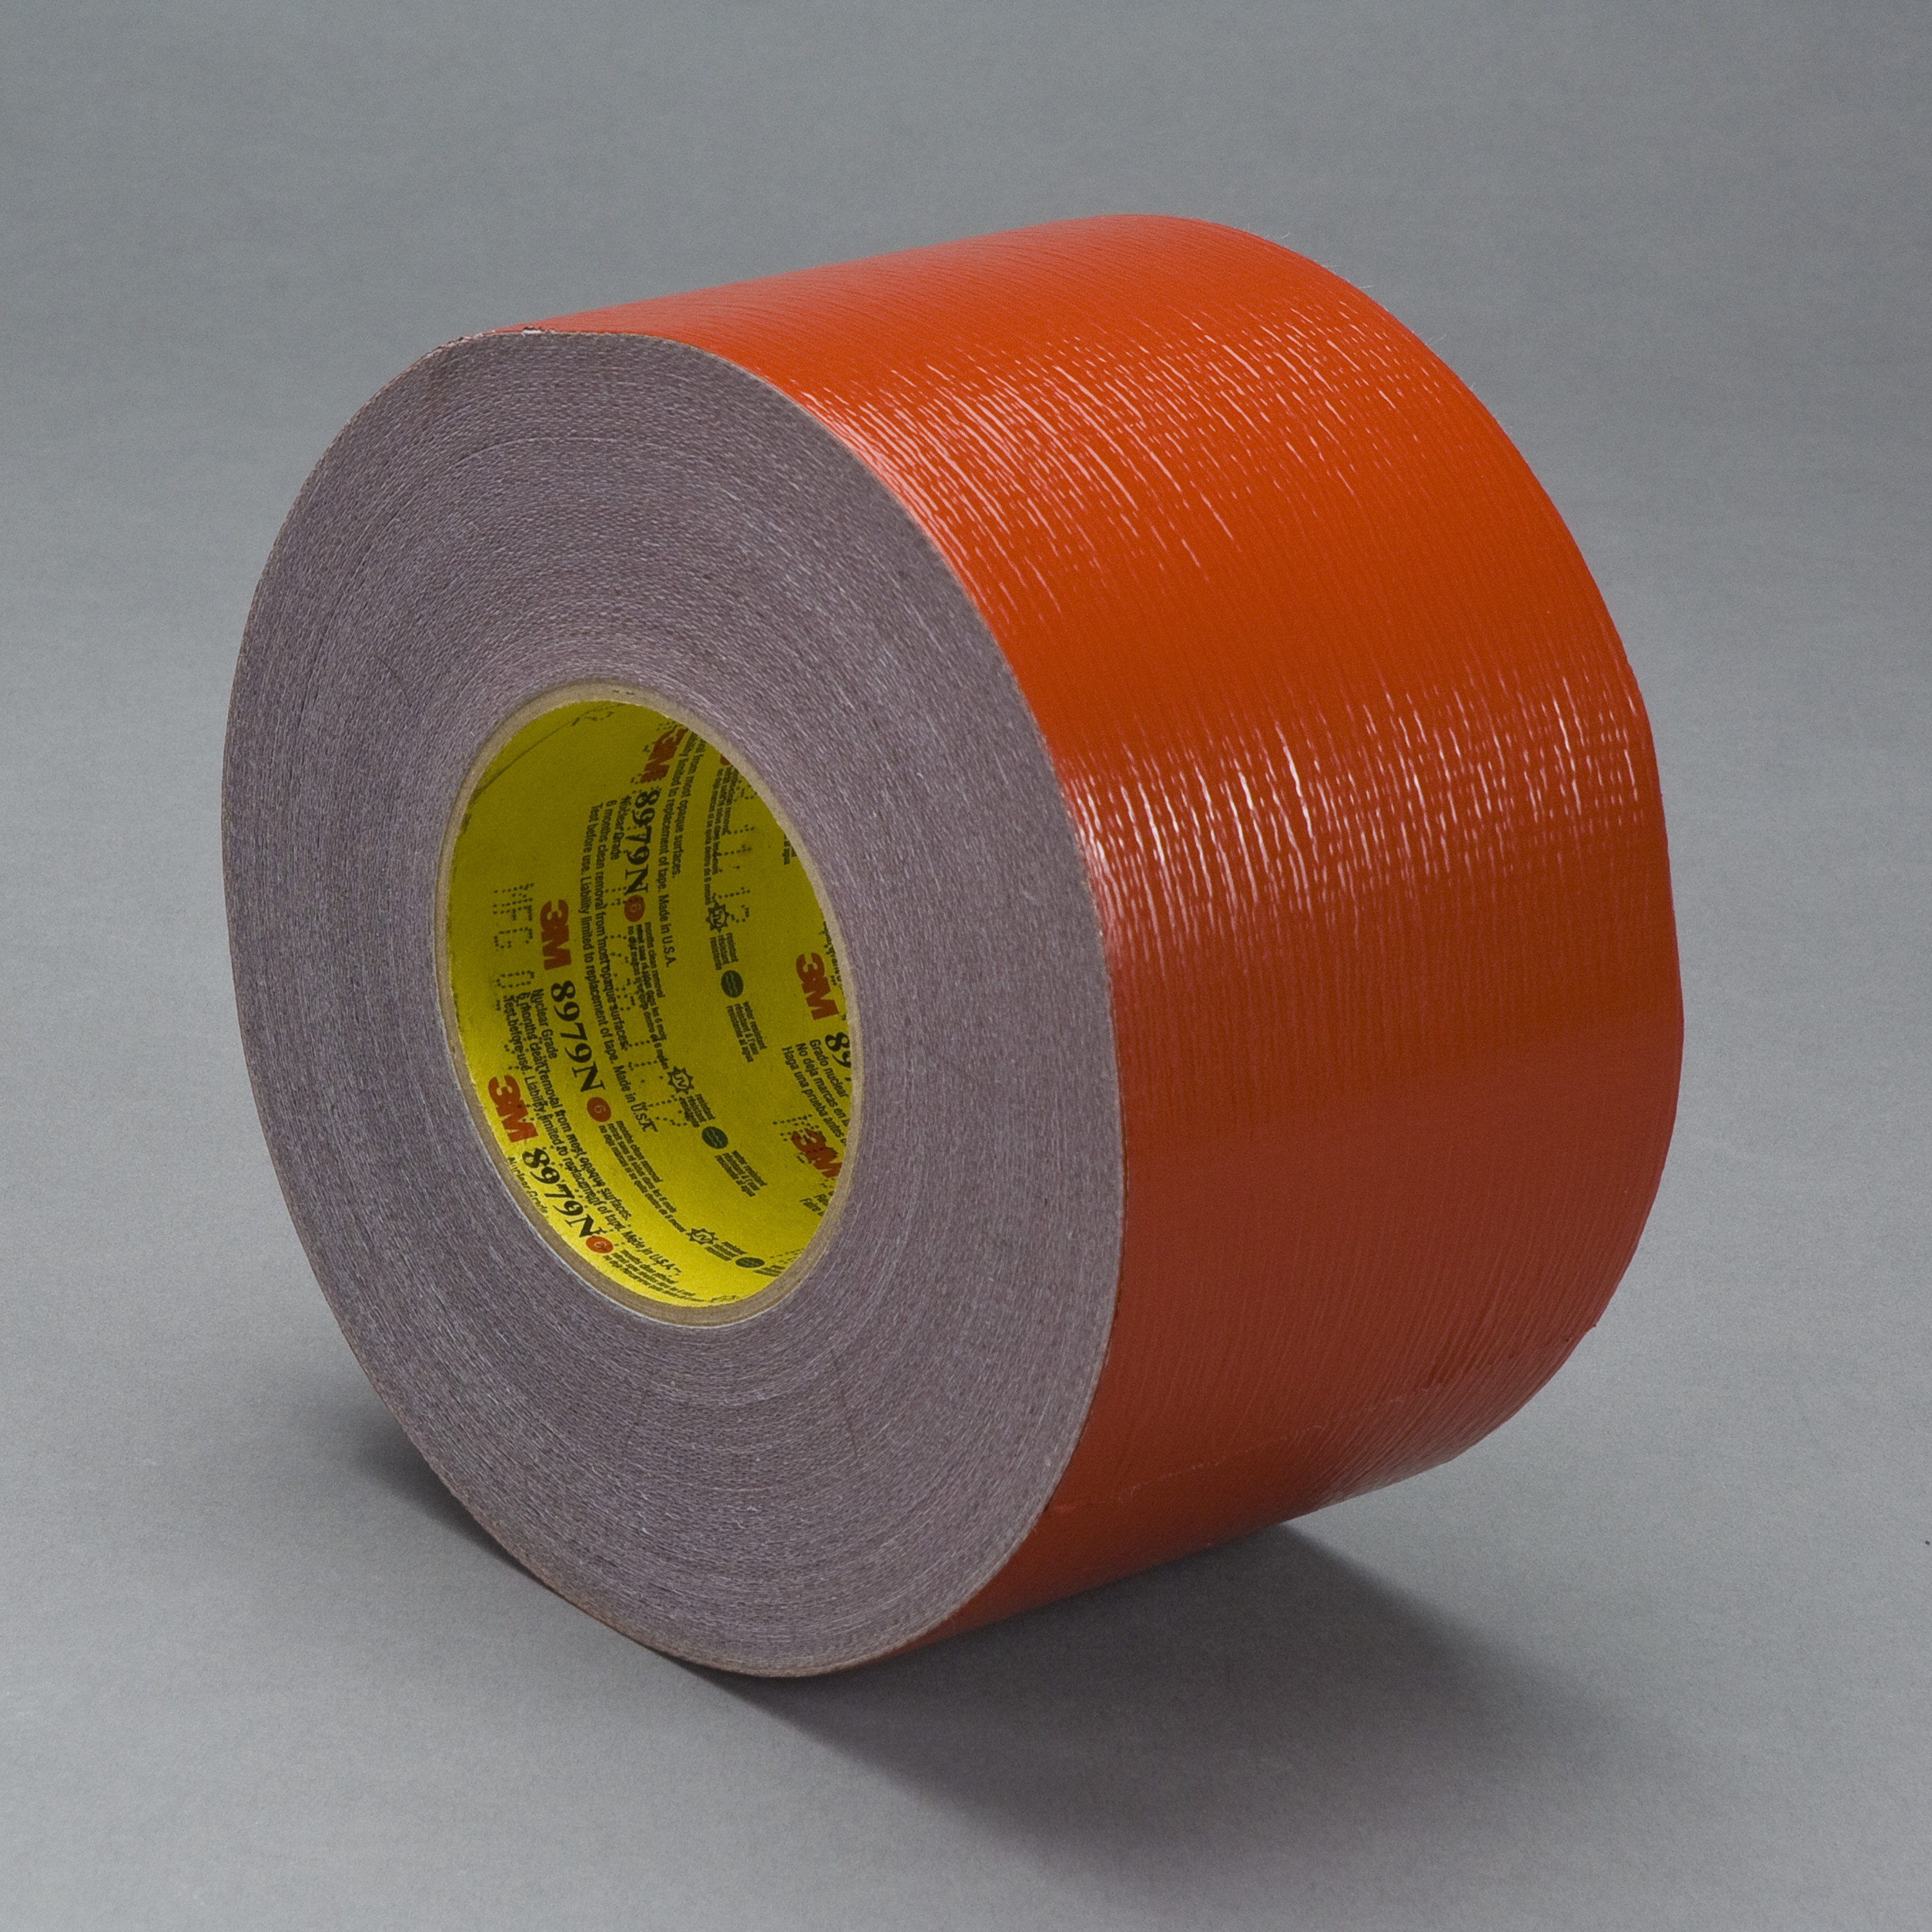 3M™ Performance Plus Duct Tape 8979N (Nuclear), Red, 48 mm x 54.8 m,
12.1 mil, 24 per case